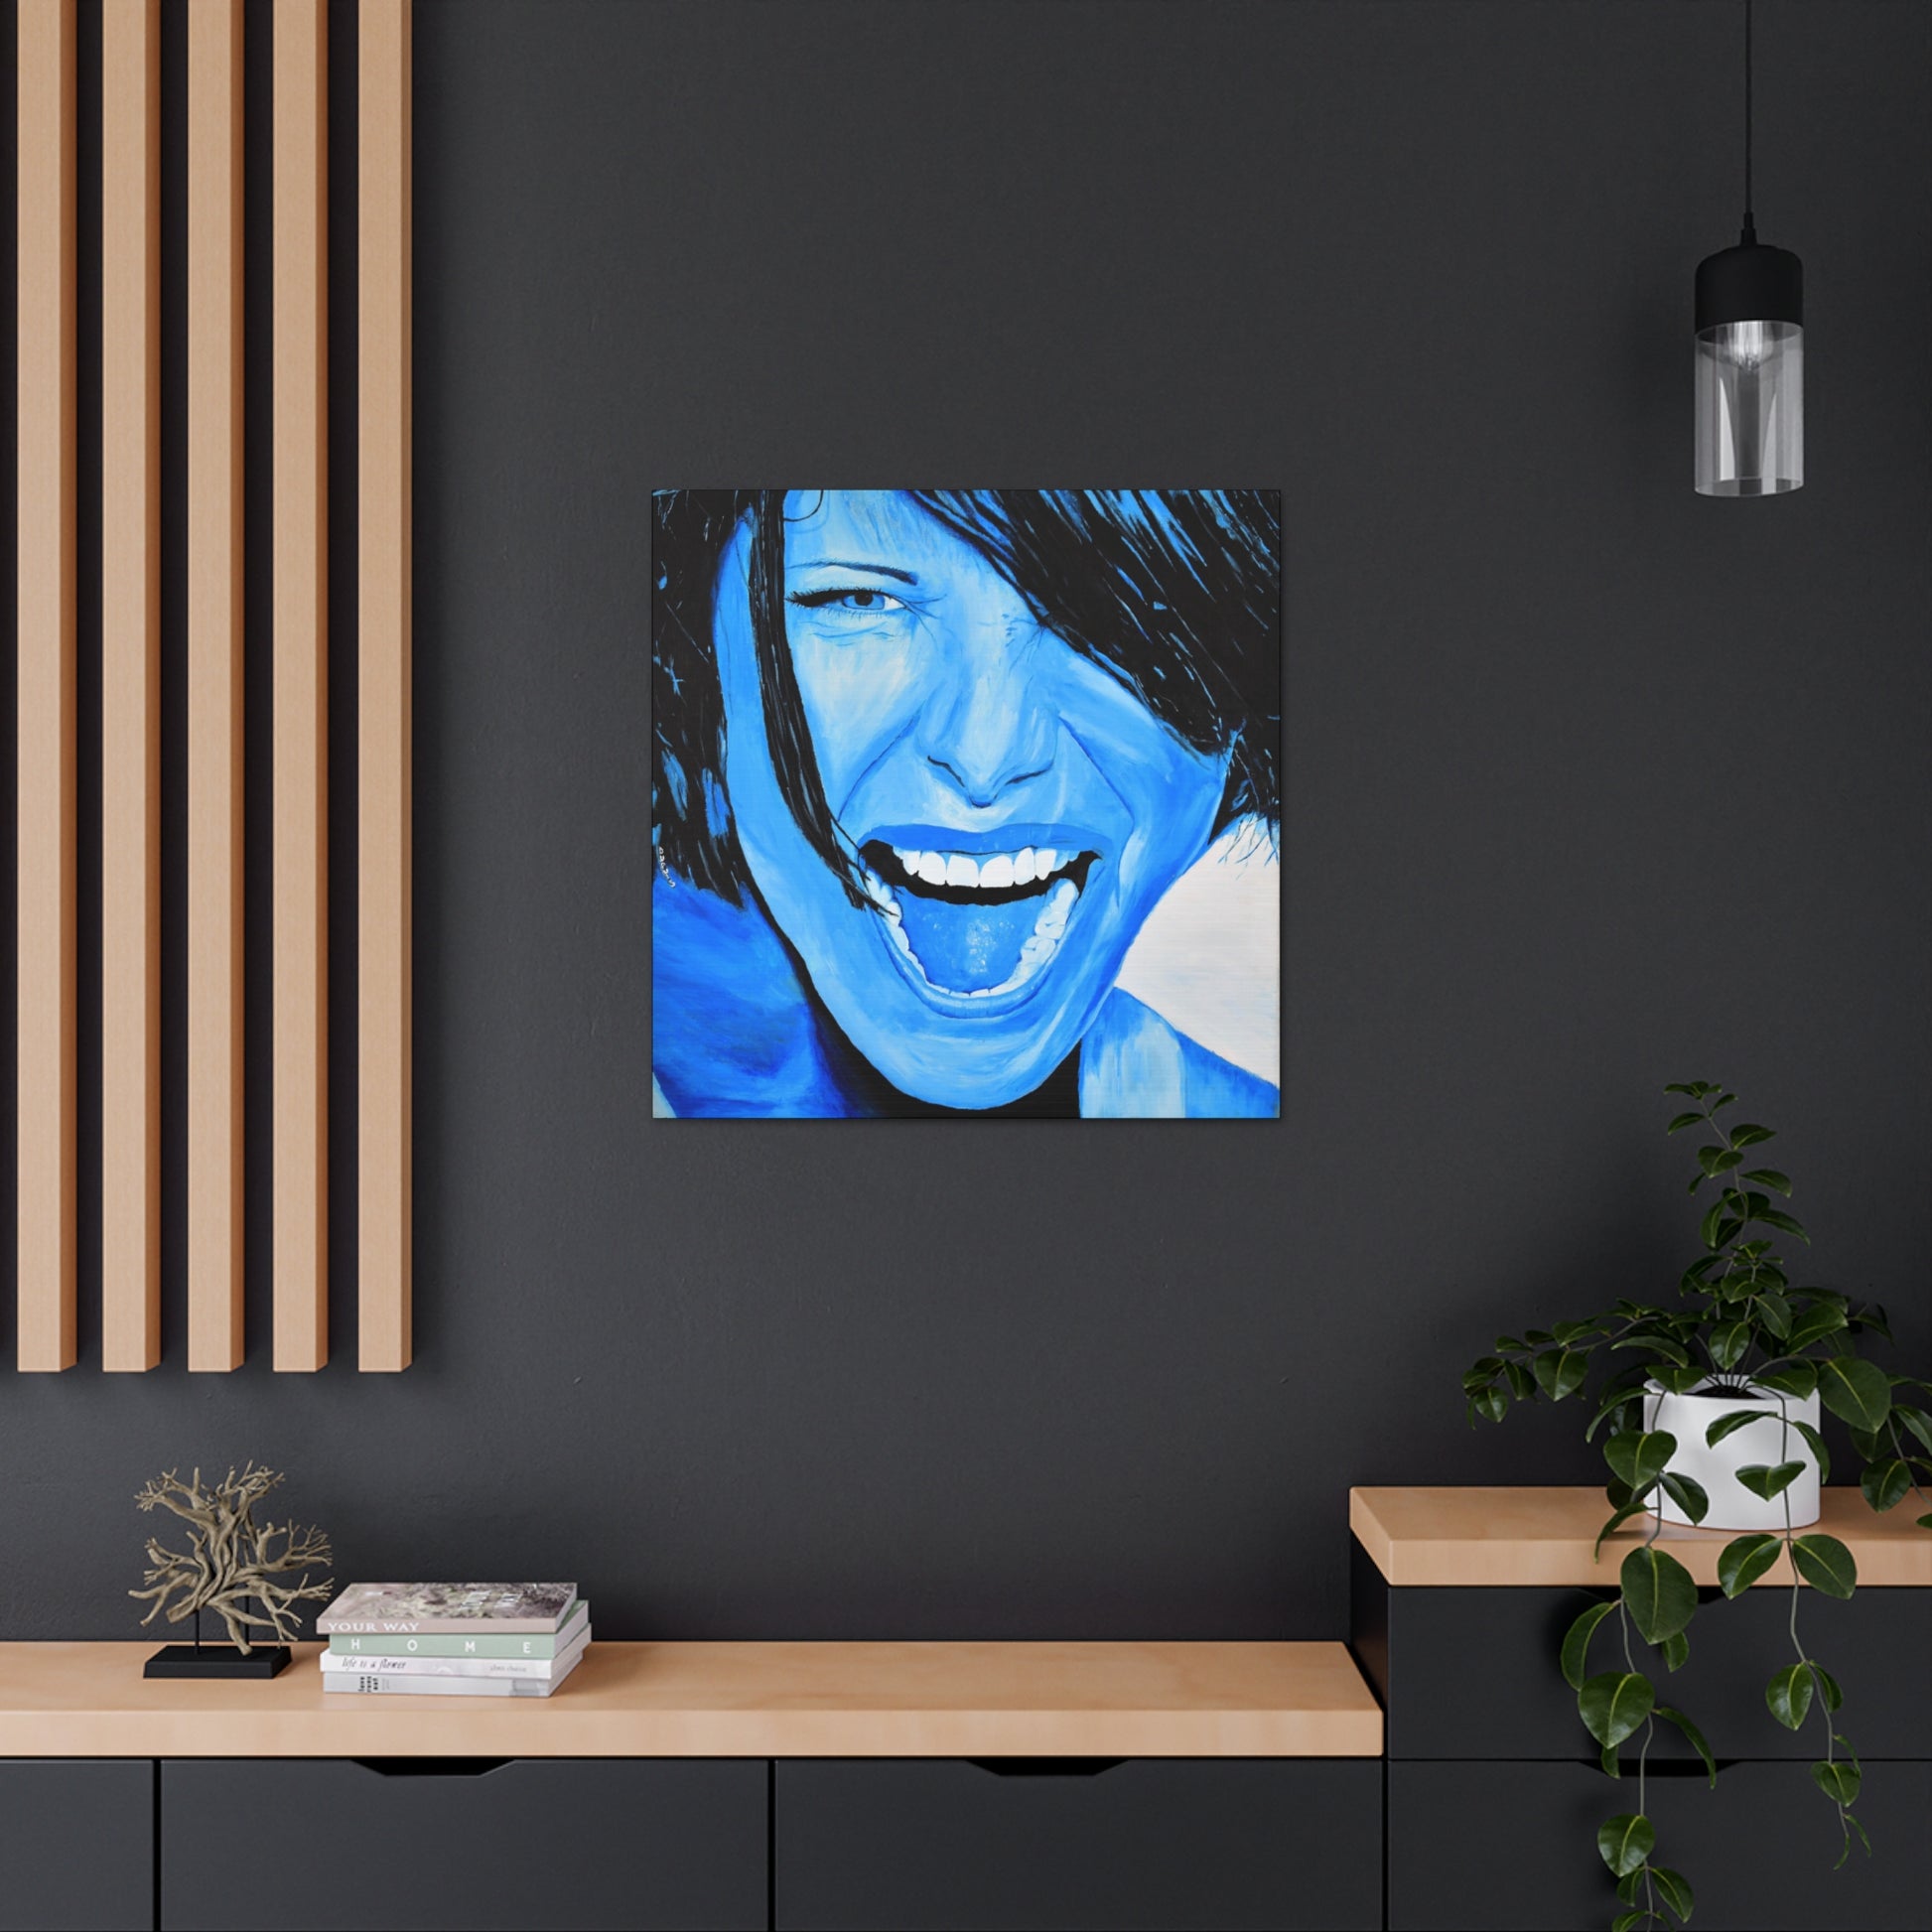 A bright blue art print on canvas of a passionate woman showing emotions, hanging on a wall over cabinets in an office